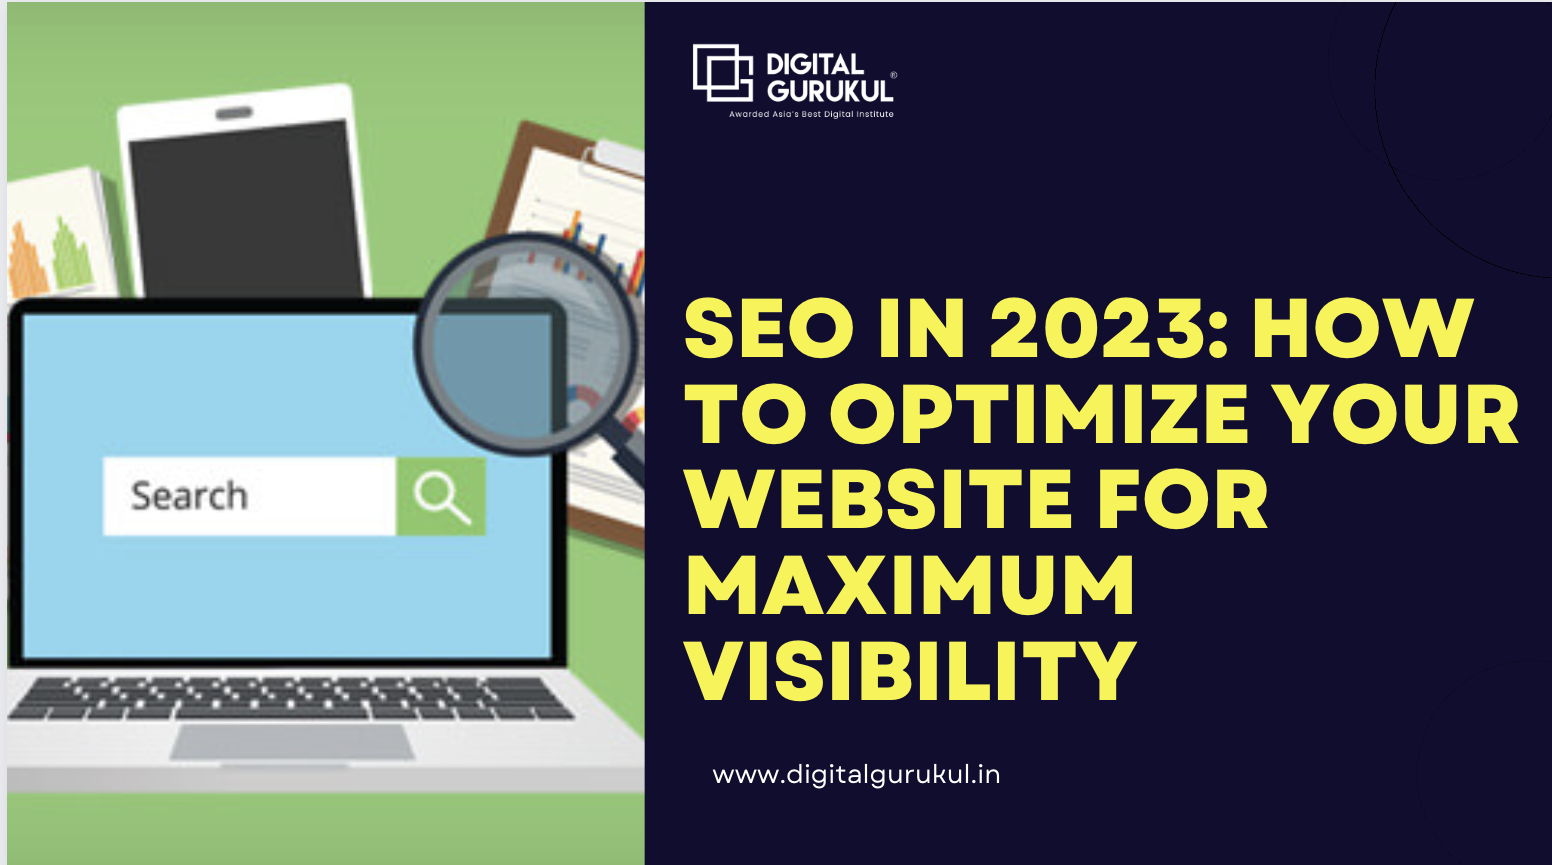 SEO in 2023: How to Optimize Your Website for Maximum Visibility